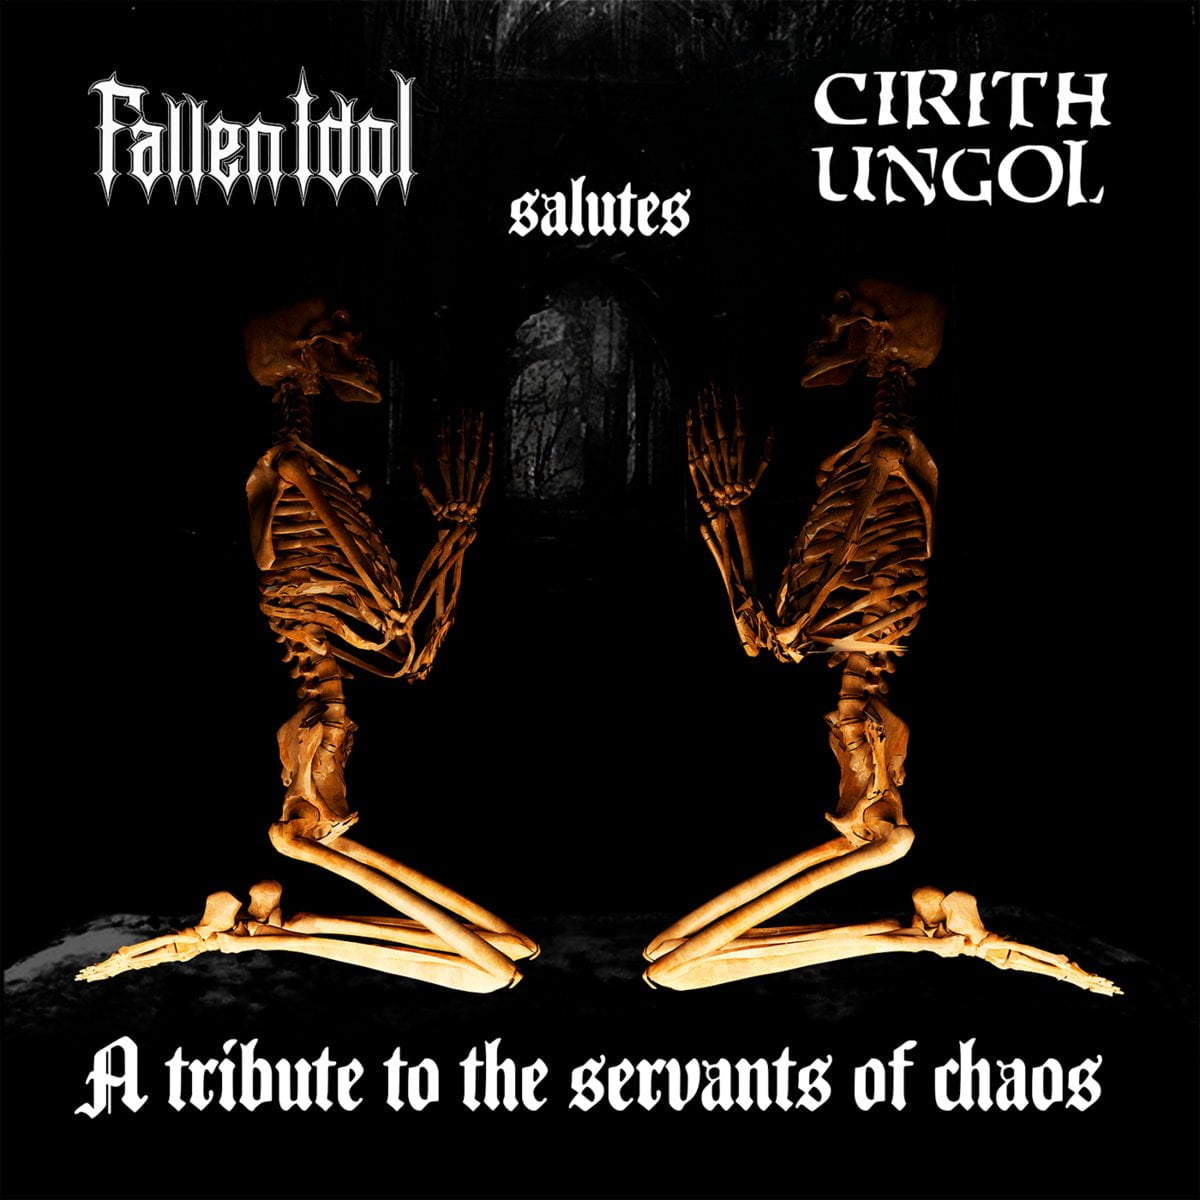 fallen-idol-salutes-cirith-ungol-a-tribute-to-the-servants-of-chaos I'm Alive  